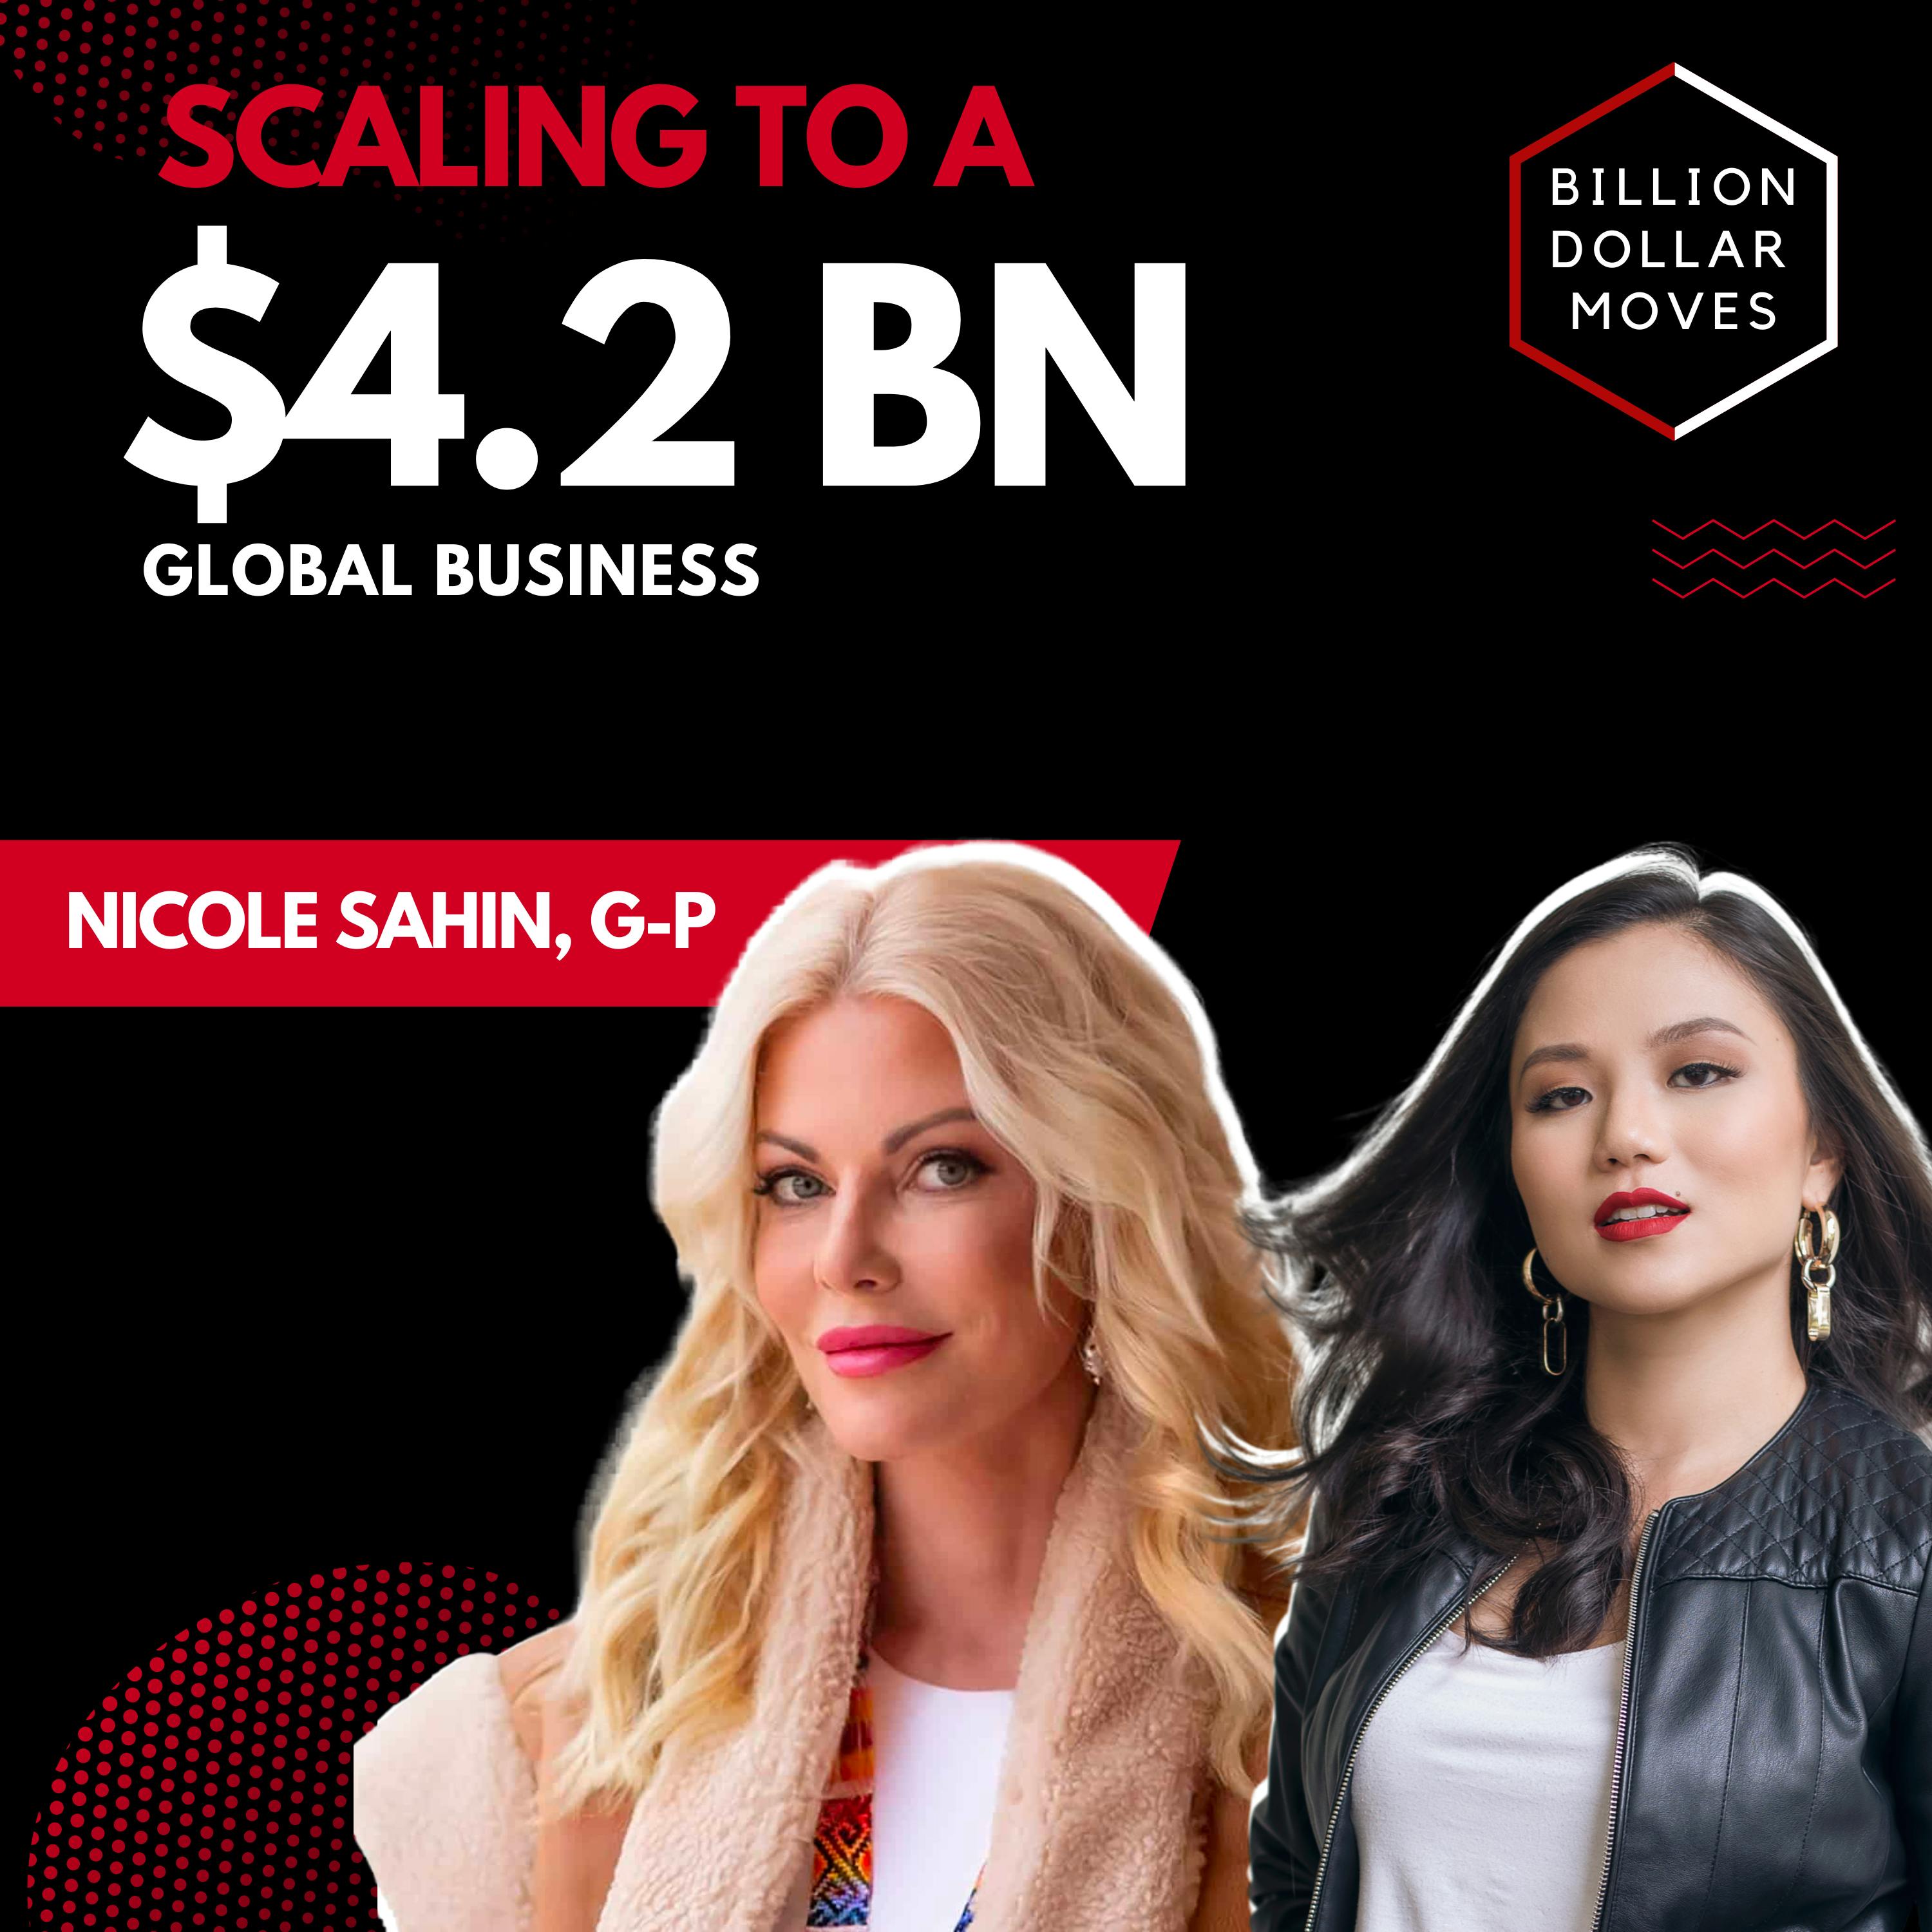 "When The S**t Hits The Fan"—Scaling to a $4.2 Bn Global Business with Nicole Sahin, G-P (Globalization Partners)